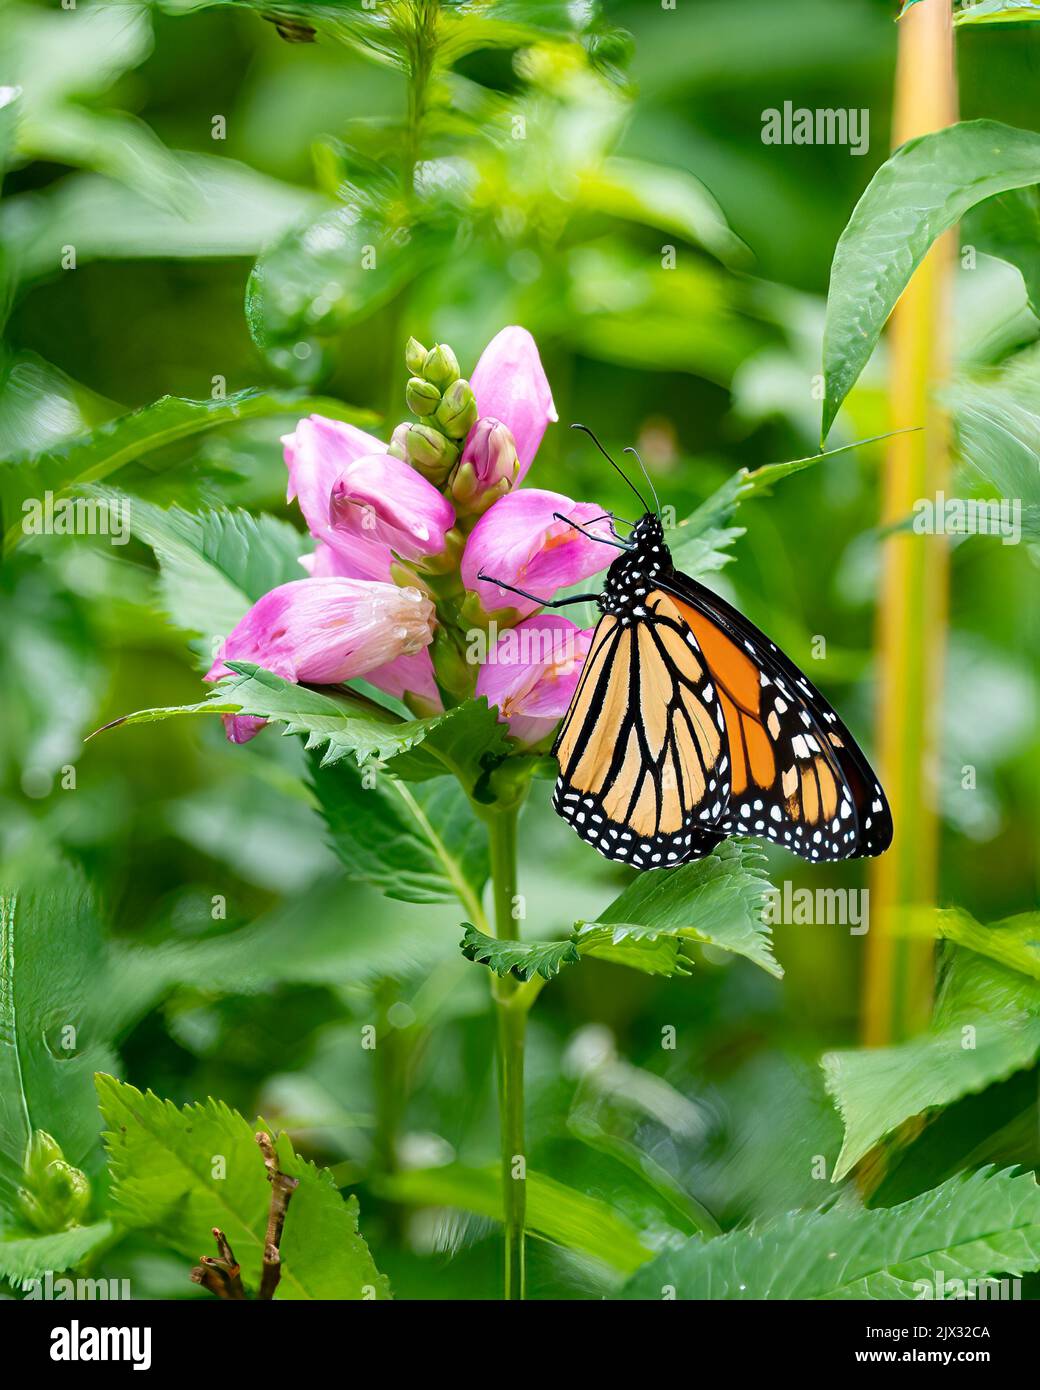 A Monarch Butterfly, Danaus plexippus, pollinating pink turtlehead flowers in a garden in Speculator, NY USA Stock Photo